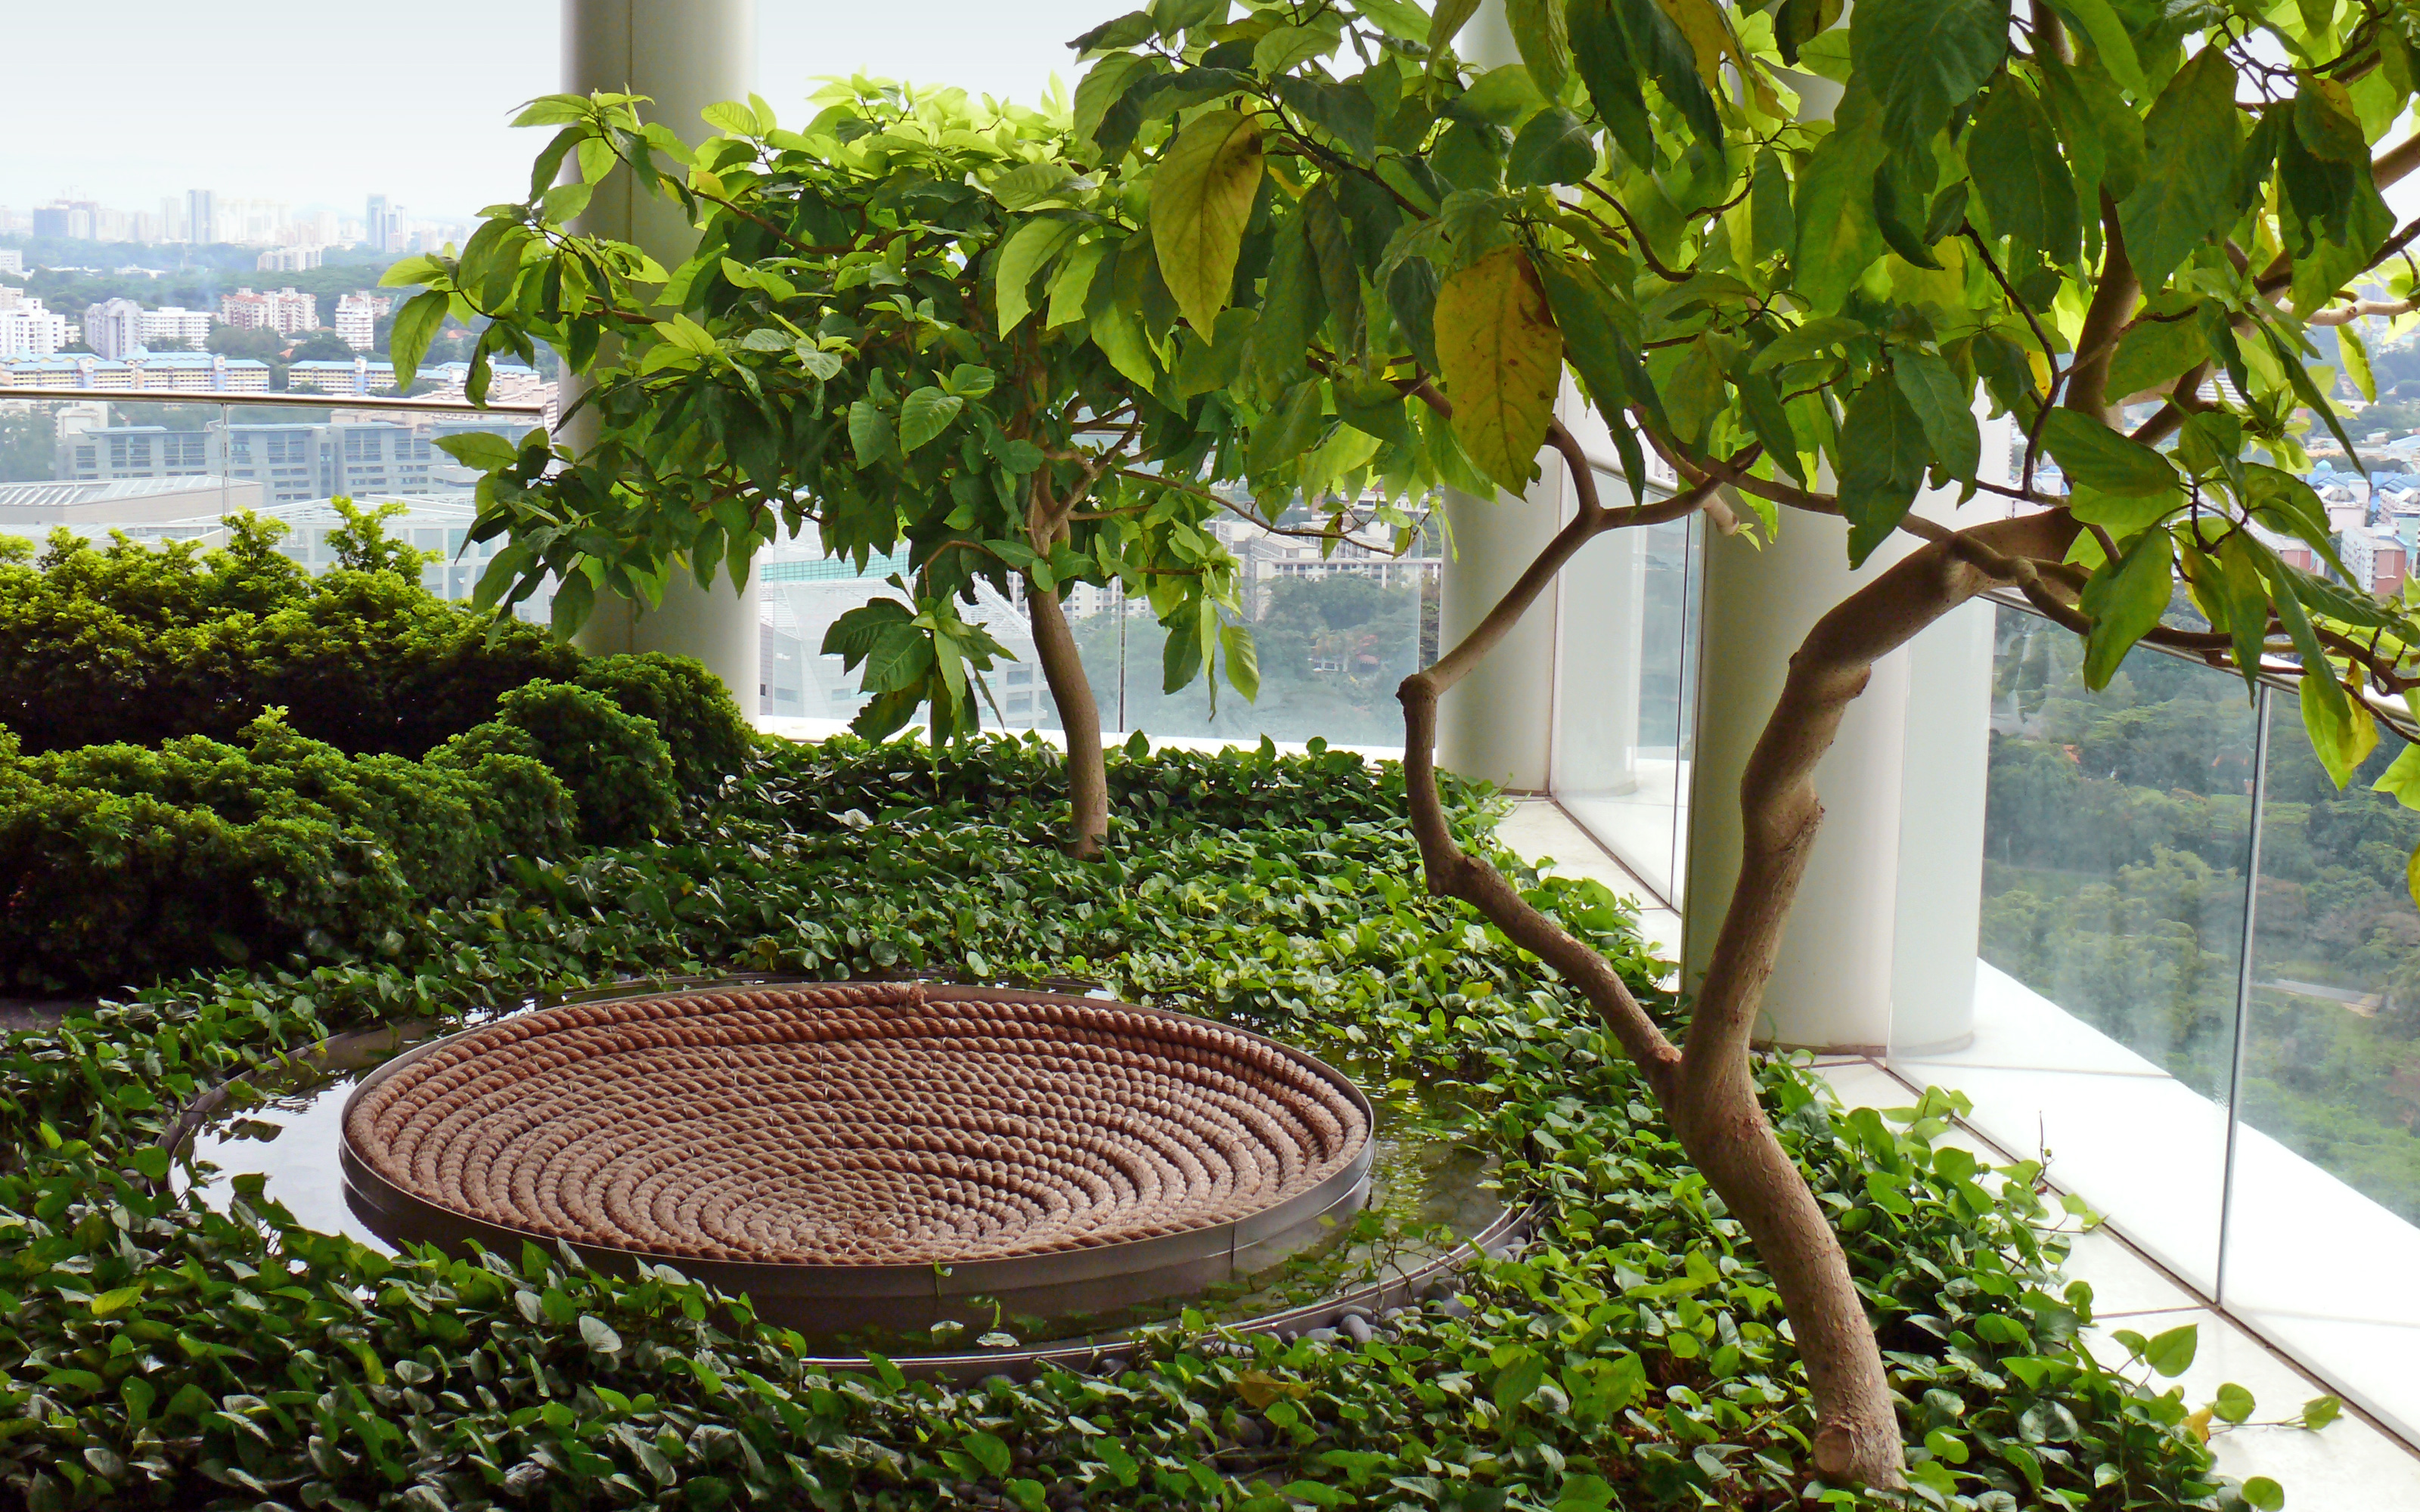 Balcony garden with water feature and small trees